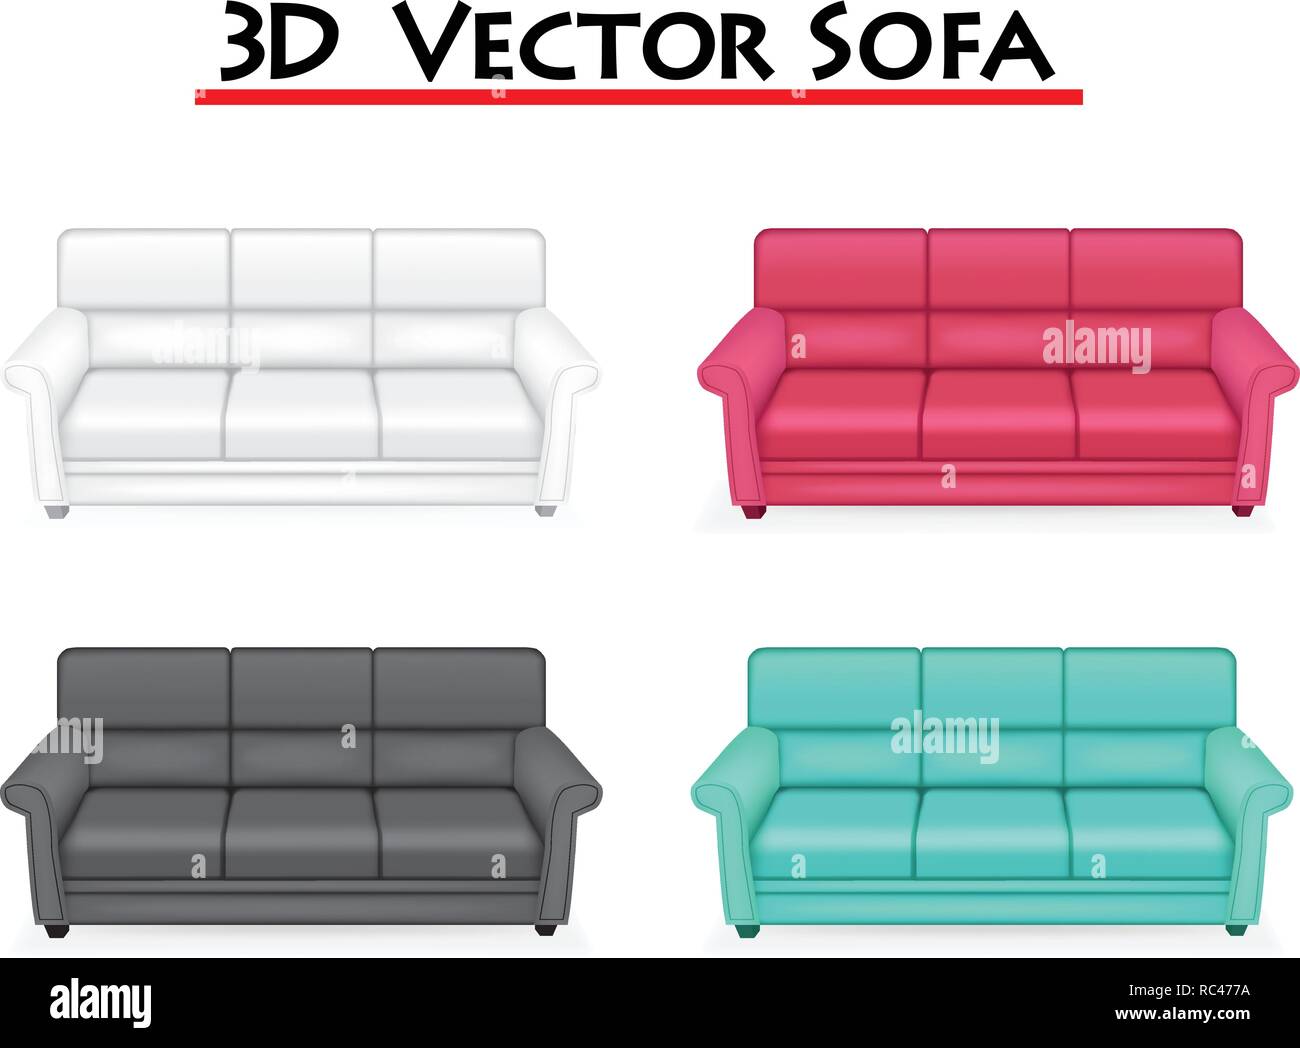 Isolated 3D Vector Sofa on white background, vector art Stock Vector